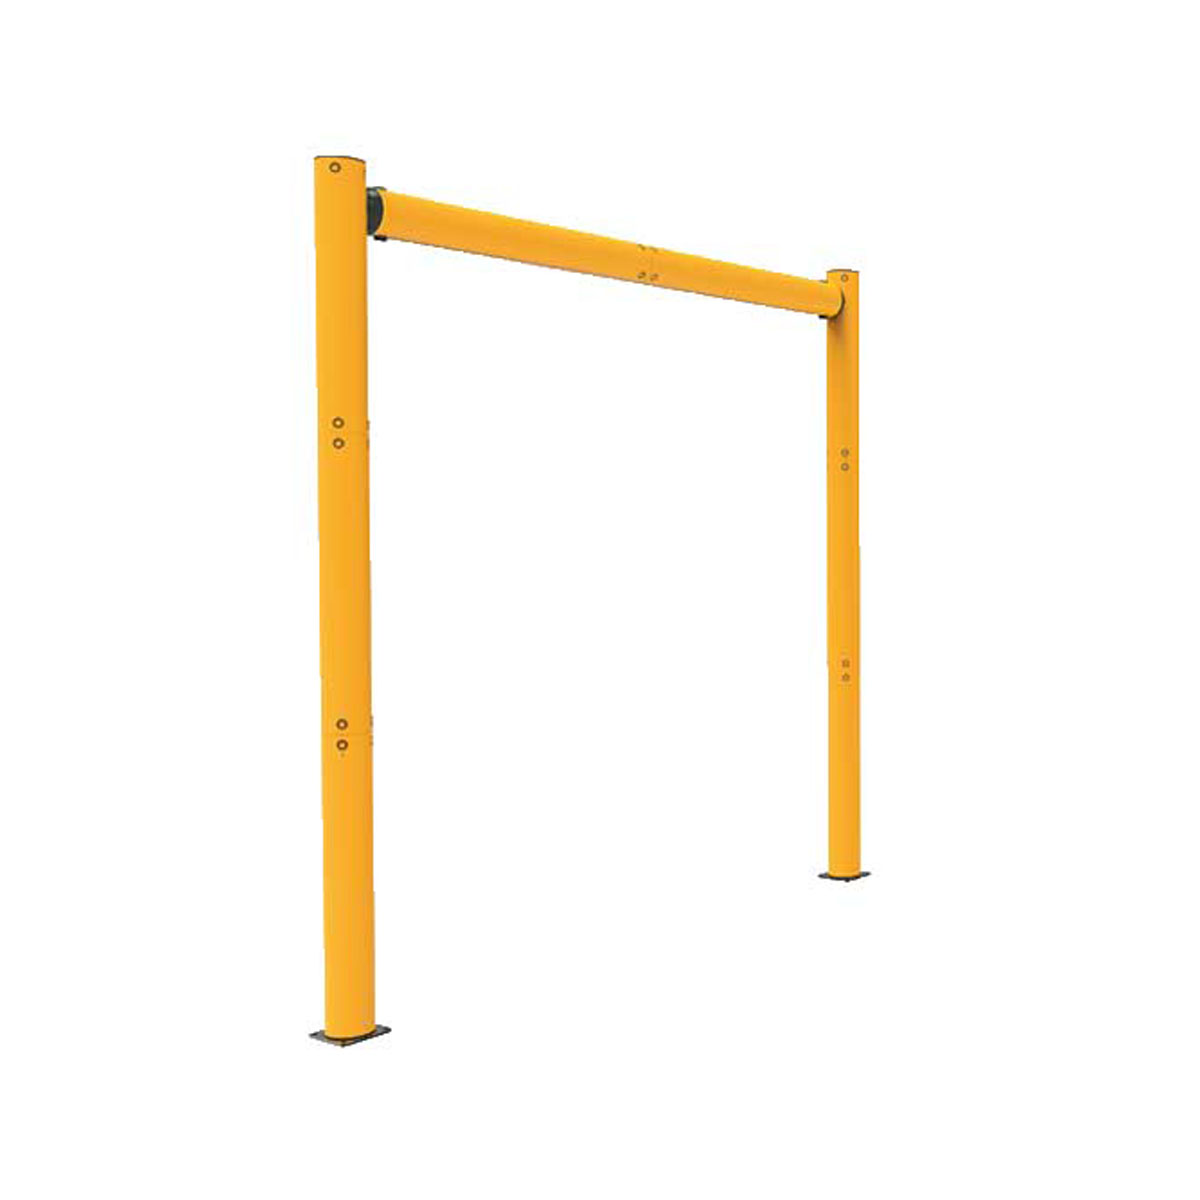 Buy Doorway Height Restrictor in Doorway Height Restrictor Bollard from A-Safe available at Astrolift NZ